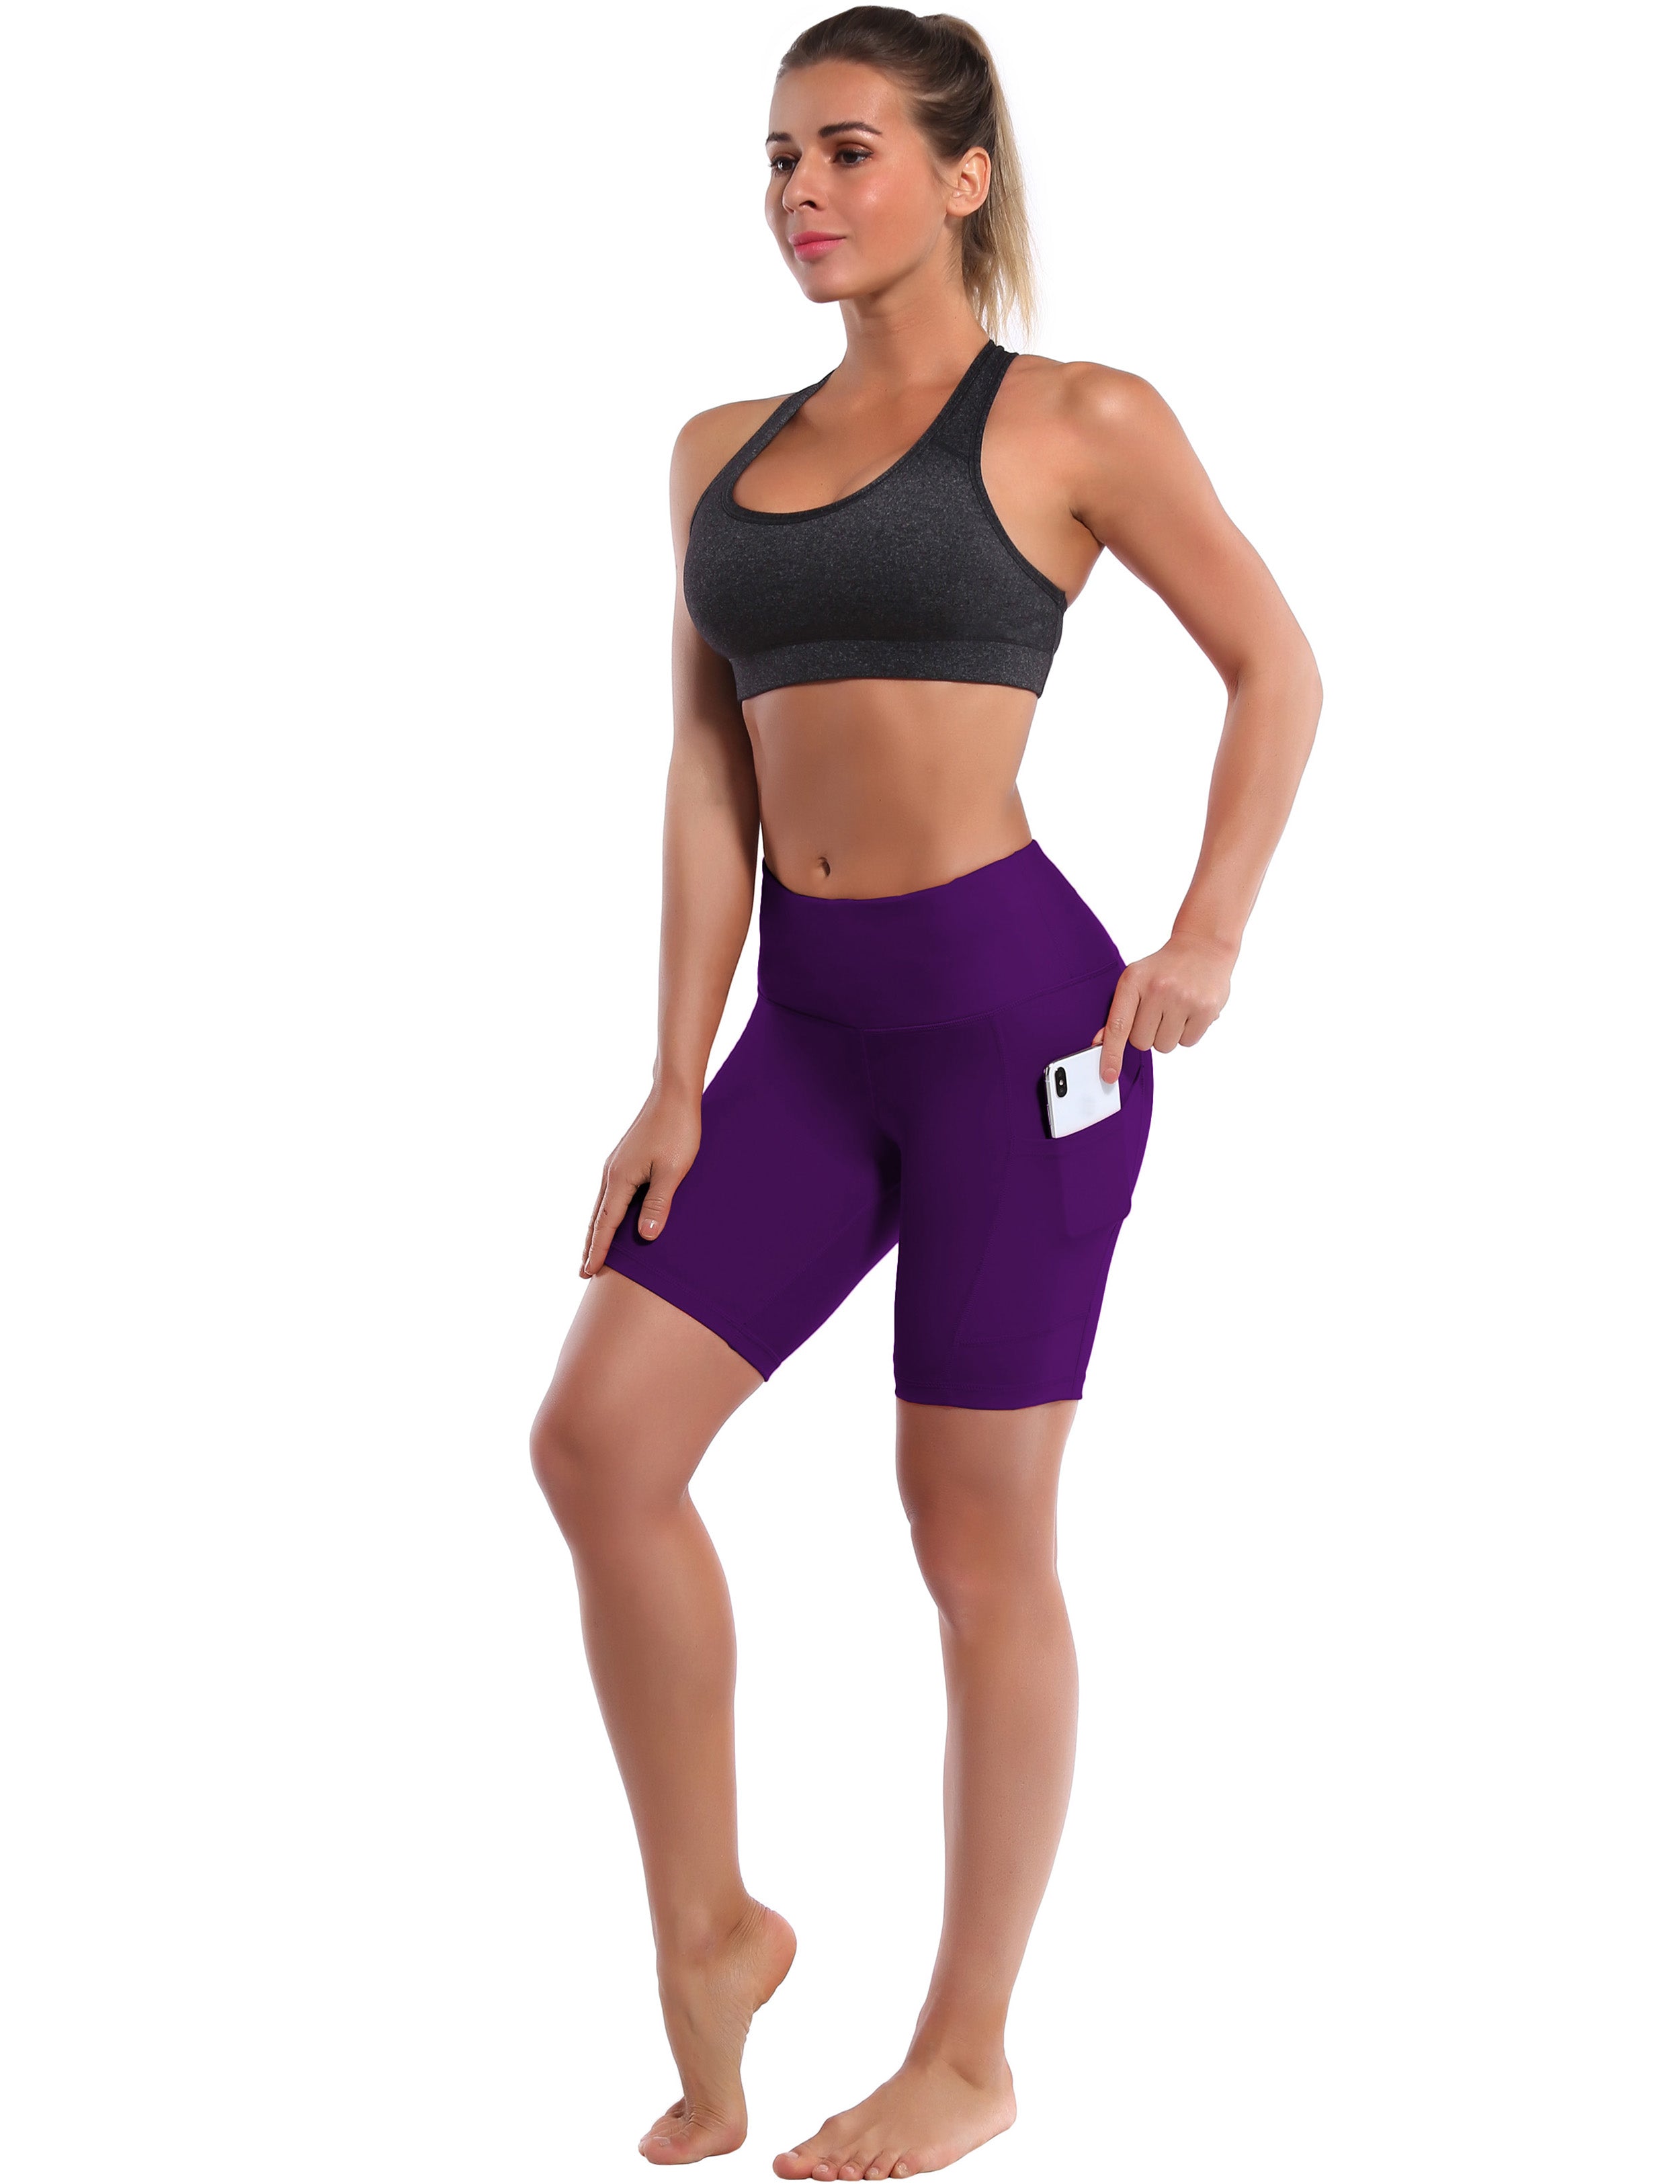 8" Side Pockets Jogging Shorts eggplantpurple Sleek, soft, smooth and totally comfortable: our newest style is here. Softest-ever fabric High elasticity High density 4-way stretch Fabric doesn't attract lint easily No see-through Moisture-wicking Machine wash 75% Nylon, 25% Spandex